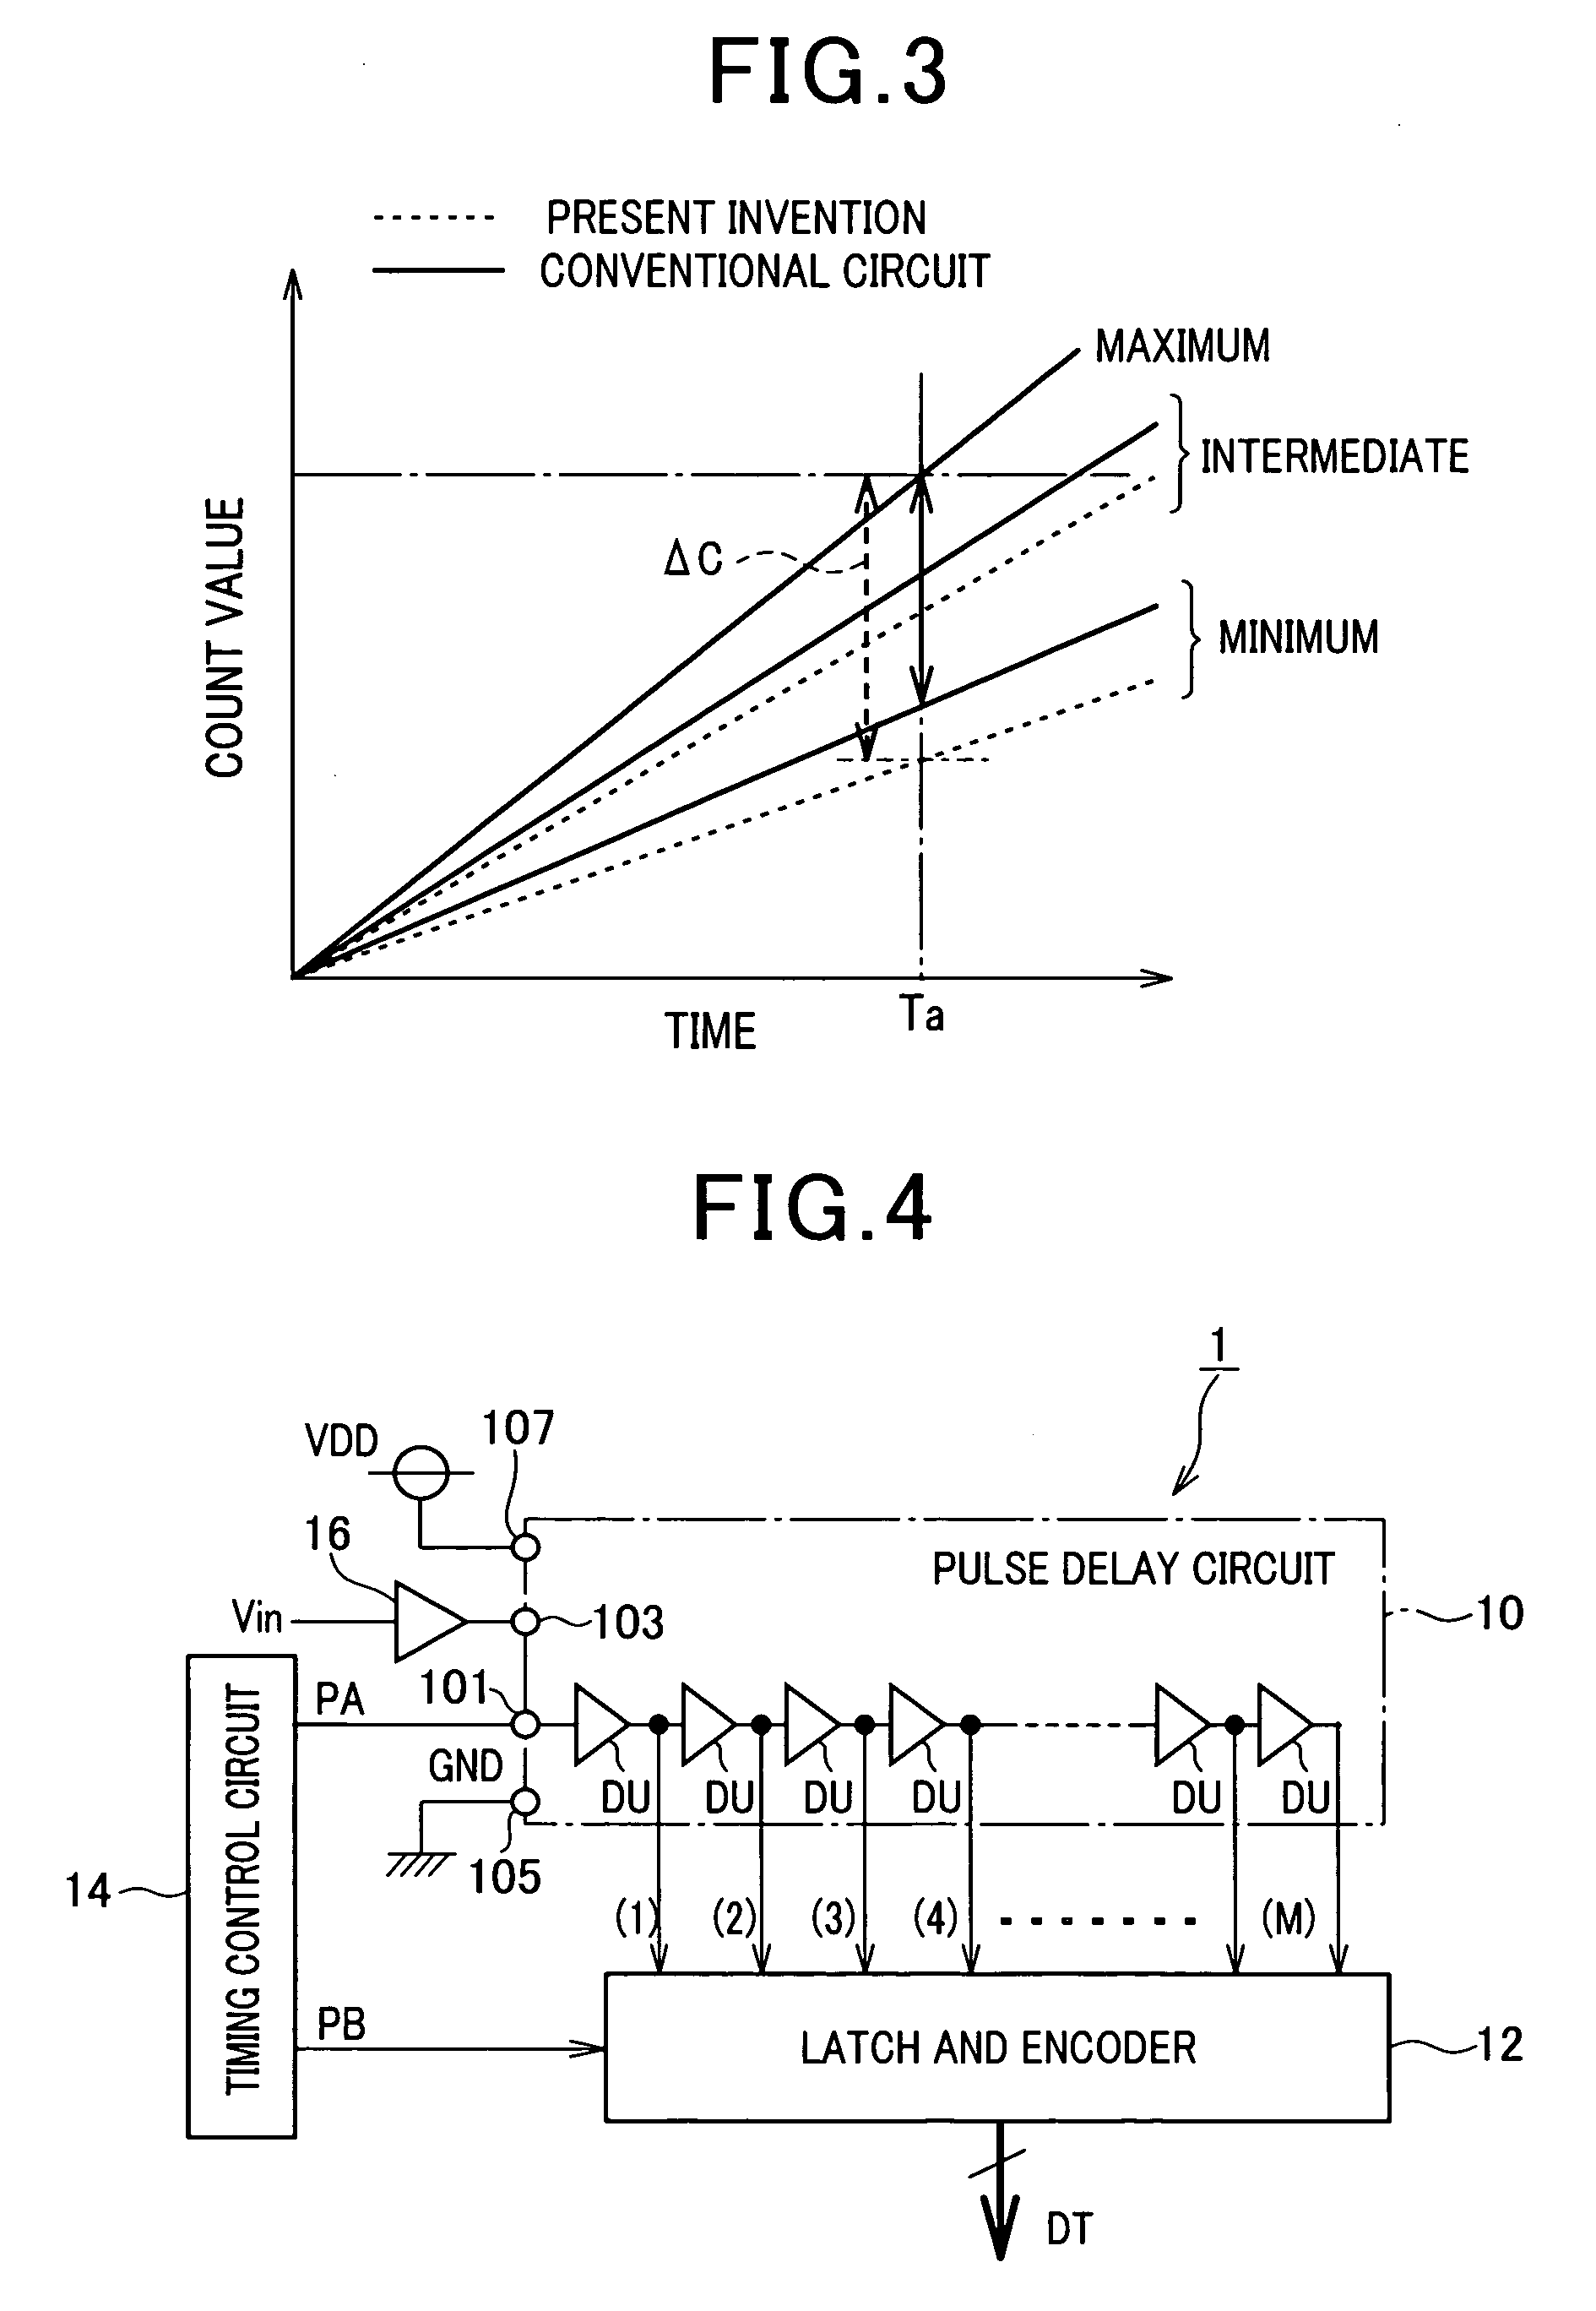 Method for controlling delay time of pulse delay circuit and pulse delay circuit thereof